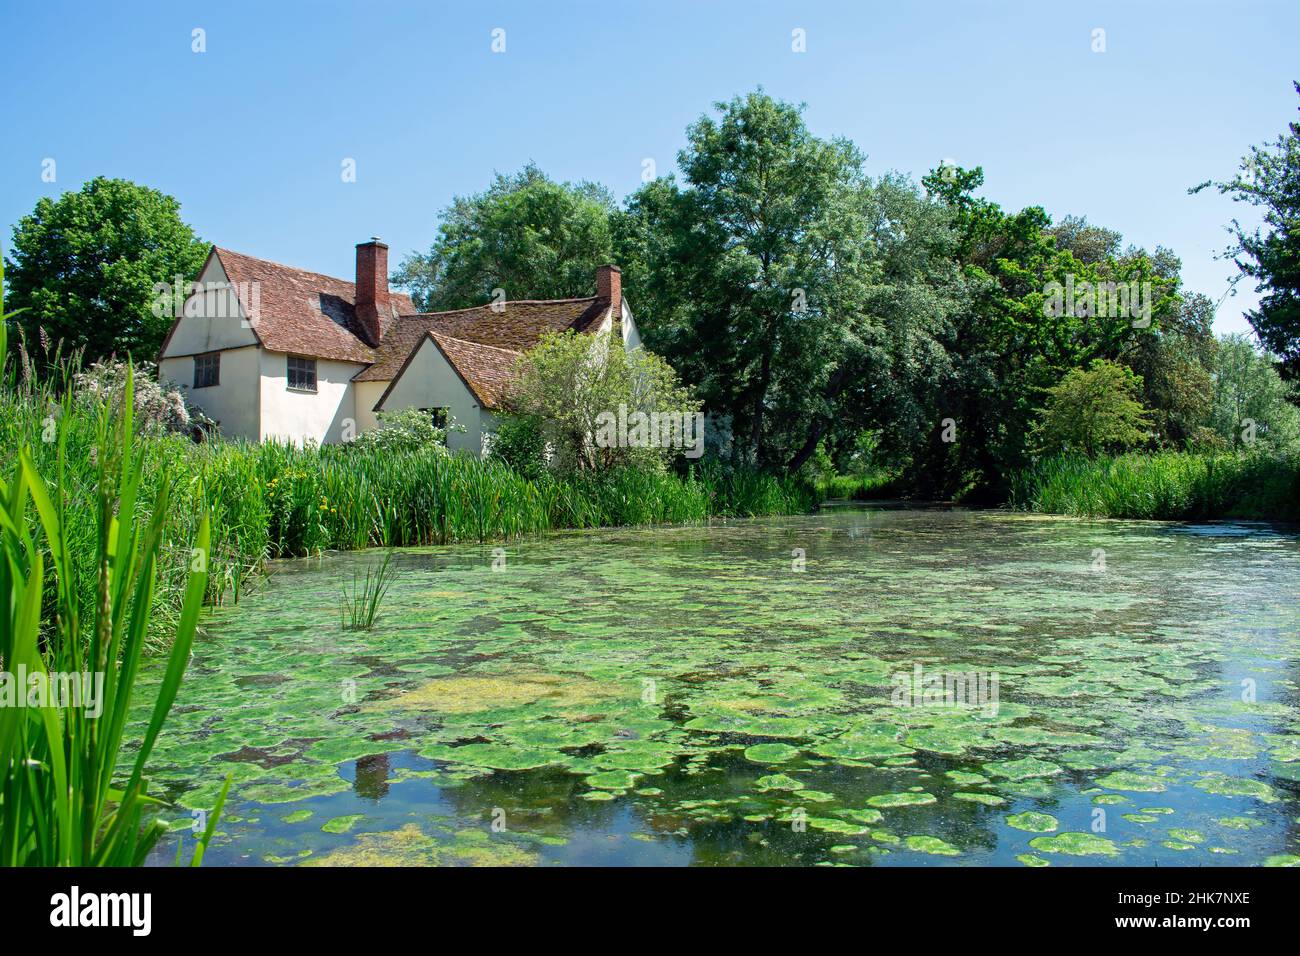 Willy Lott's Cottage in Flatford, Operated by the National Trust in Suffolk, England.  The plant filled River Stour sits outside of the rural cottage. Stock Photo